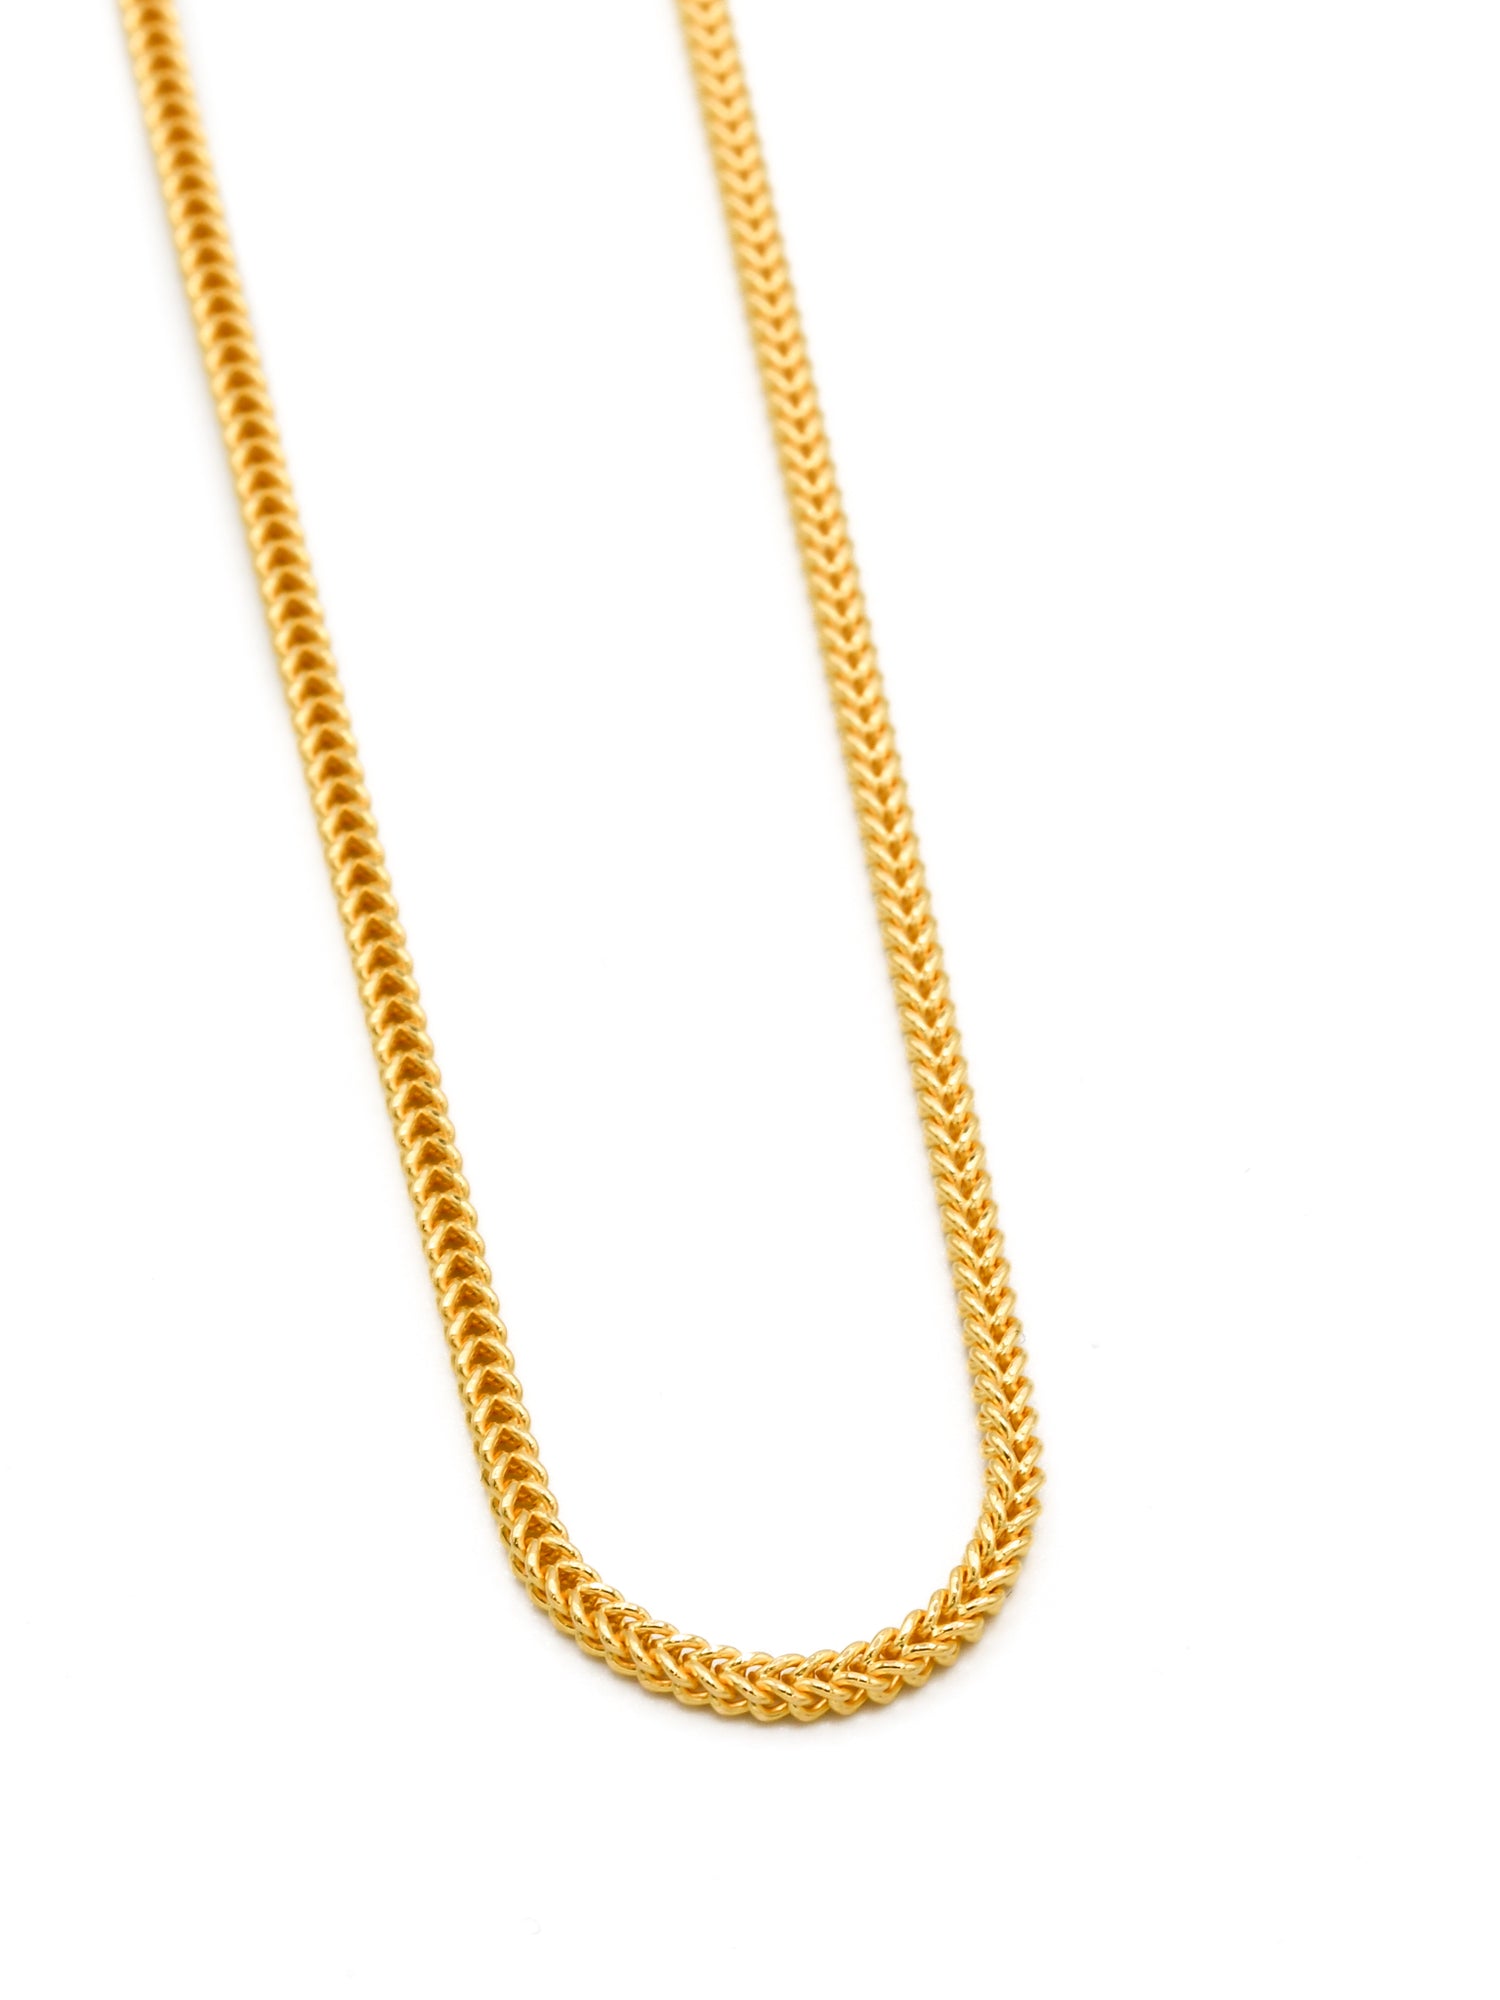 22ct Gold Hollow Fox Tail Chain - 55 CM - Roop Darshan